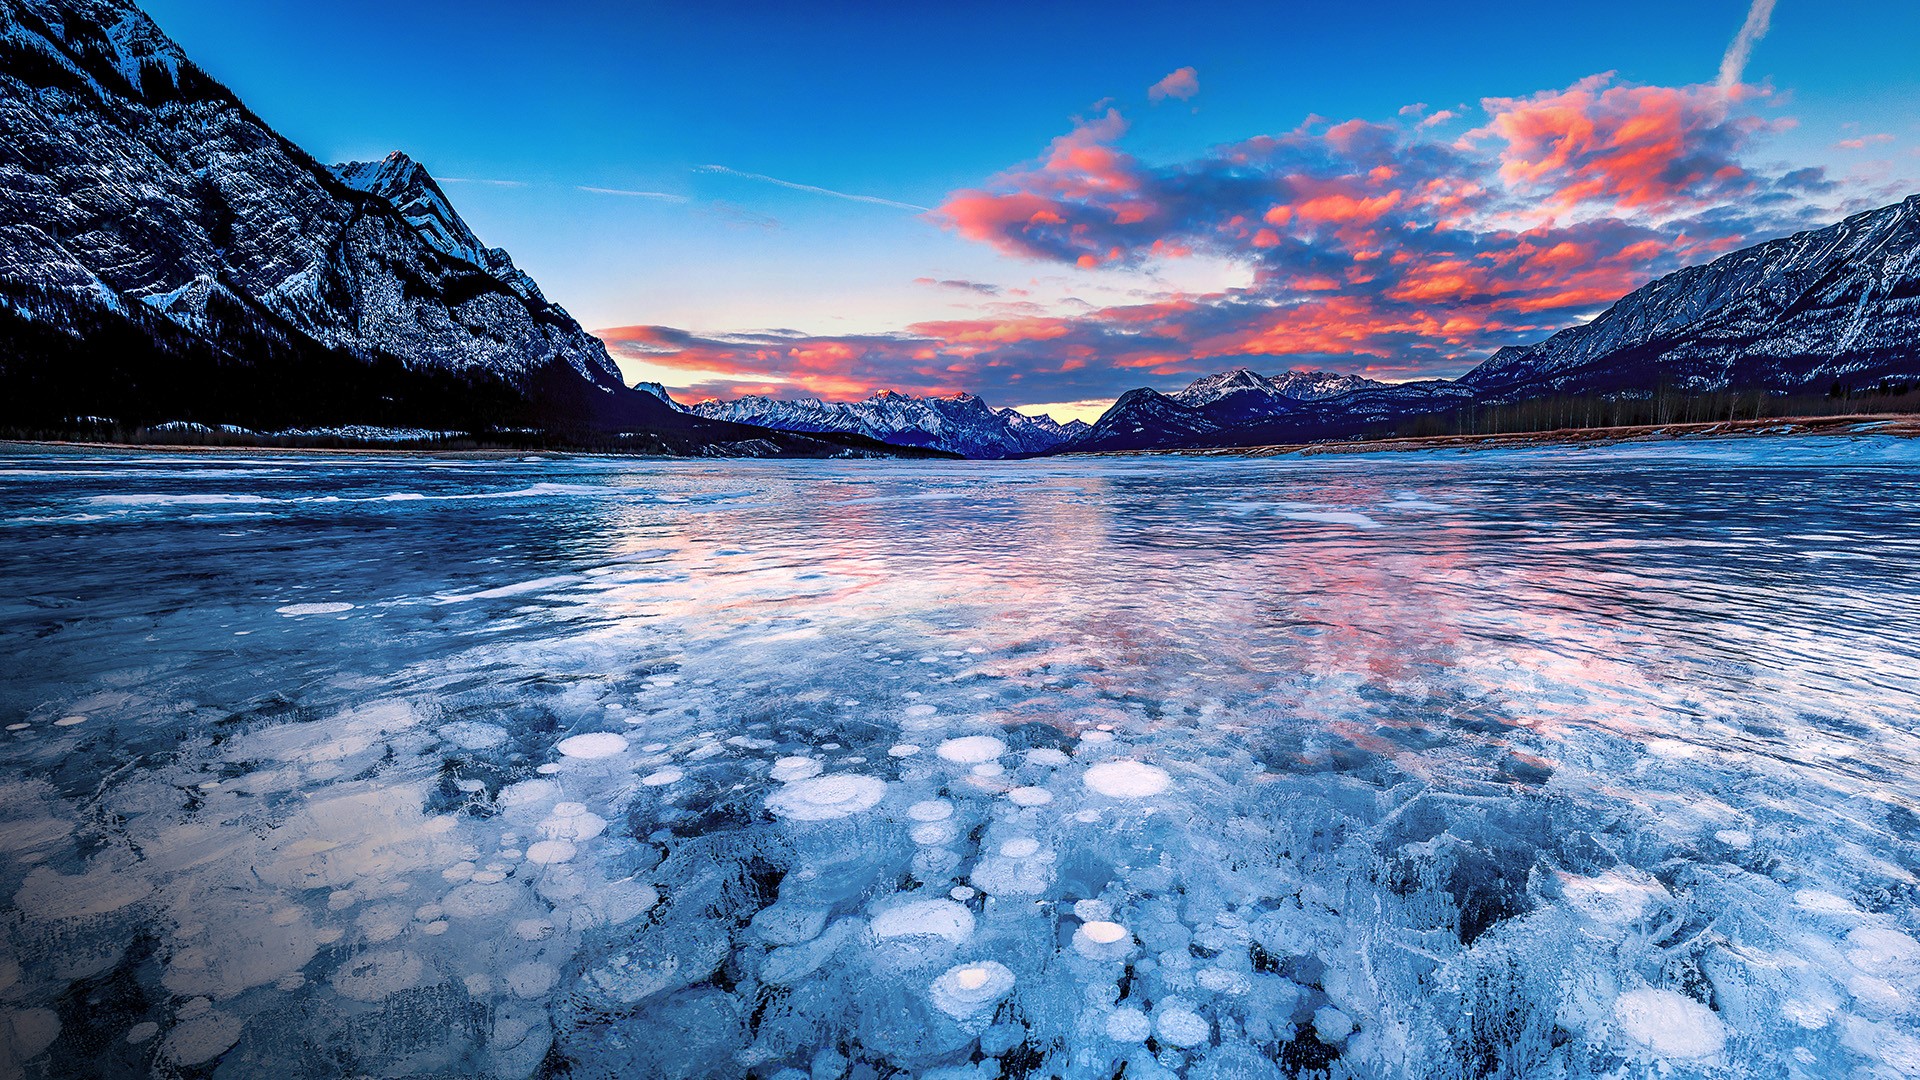 Stacks of methane bubbles under ice in Abraham Lake at sunset, Alberta ...